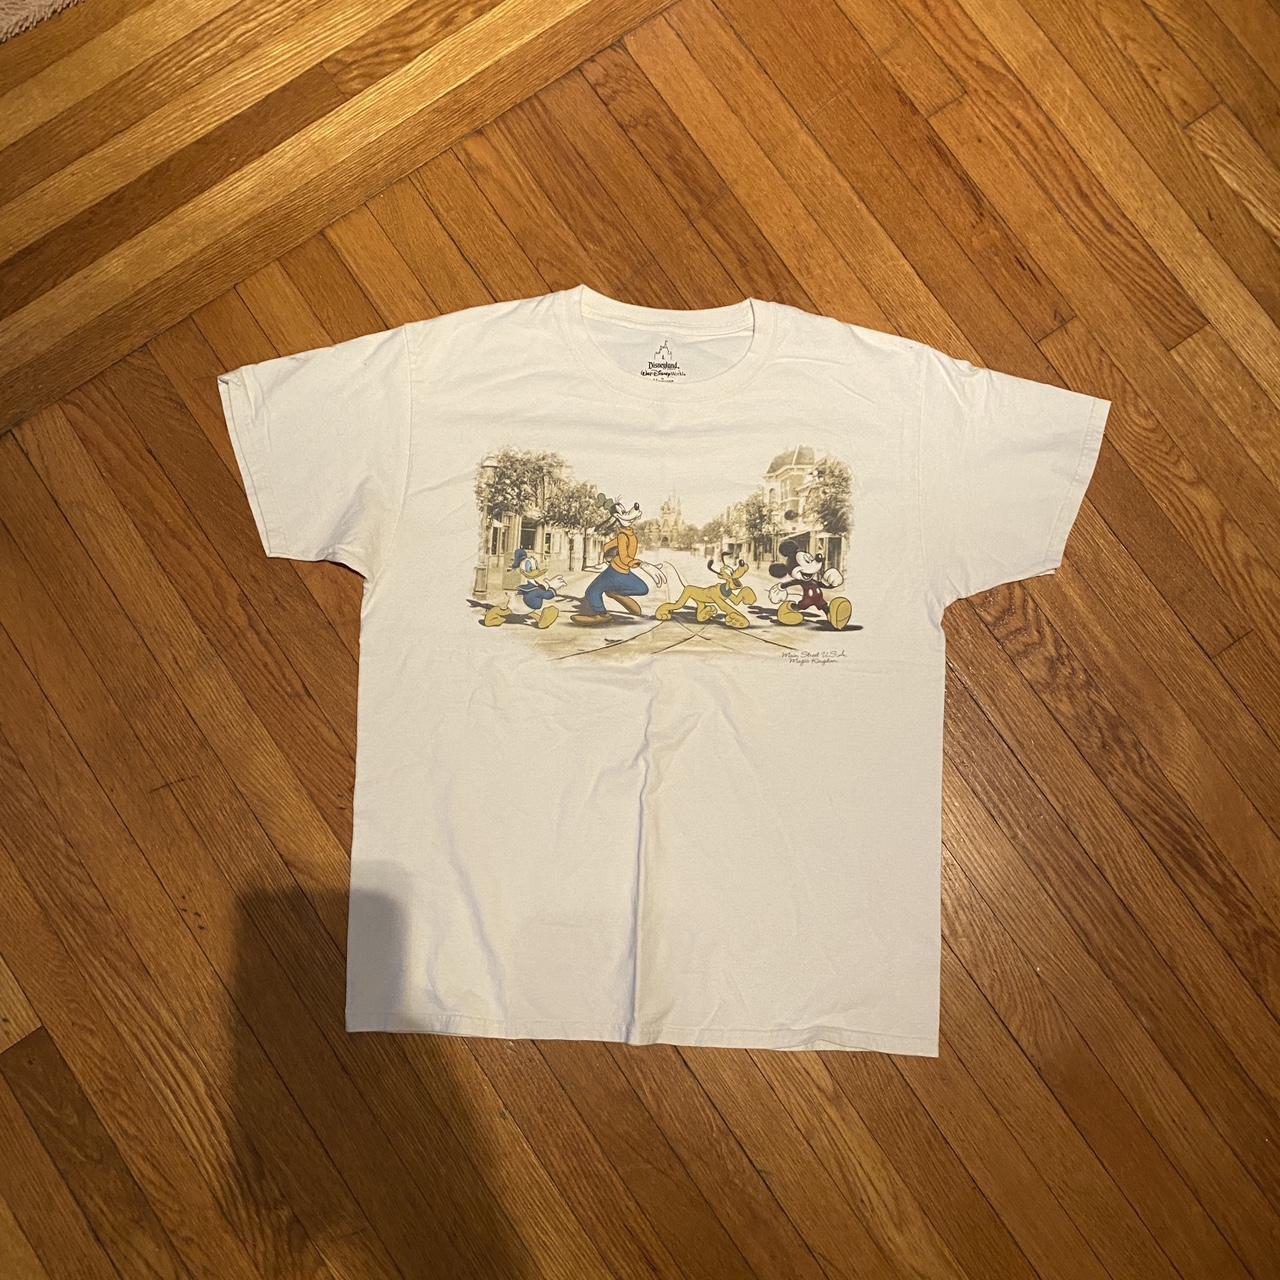 item listed by 3xthriftsml